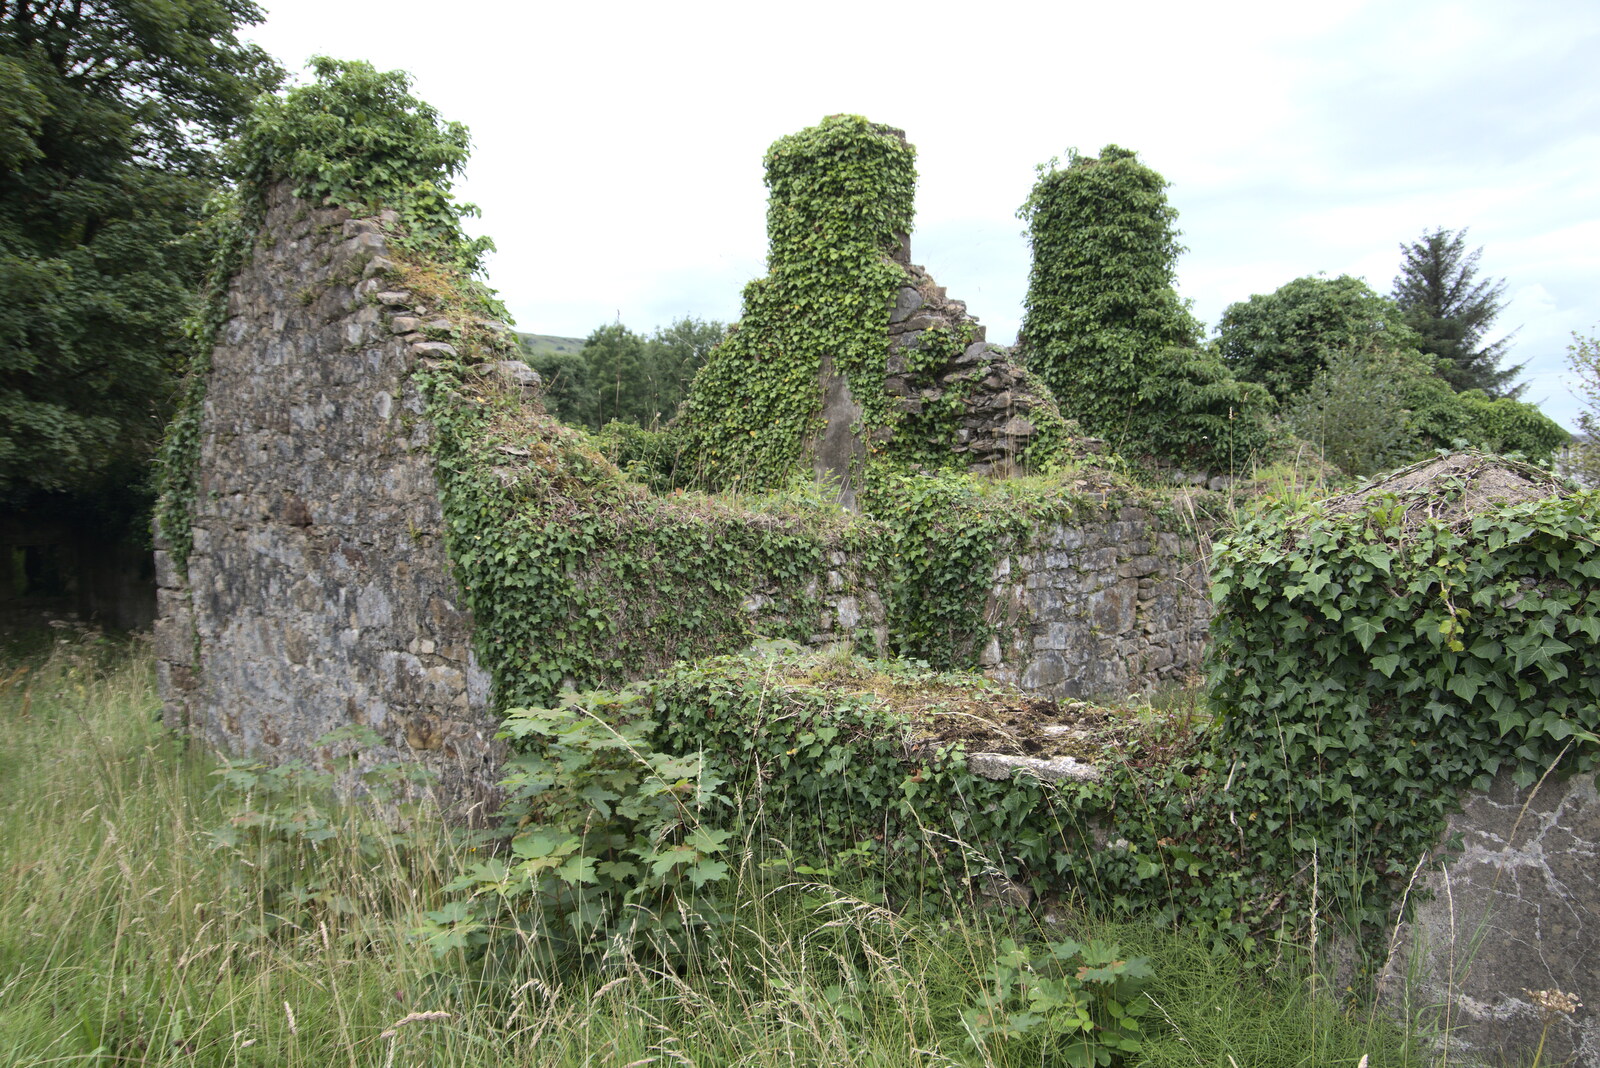 A Trip to Manorhamilton, County Leitrim, Ireland - 11th August 2021: A very derelict old stone cottage